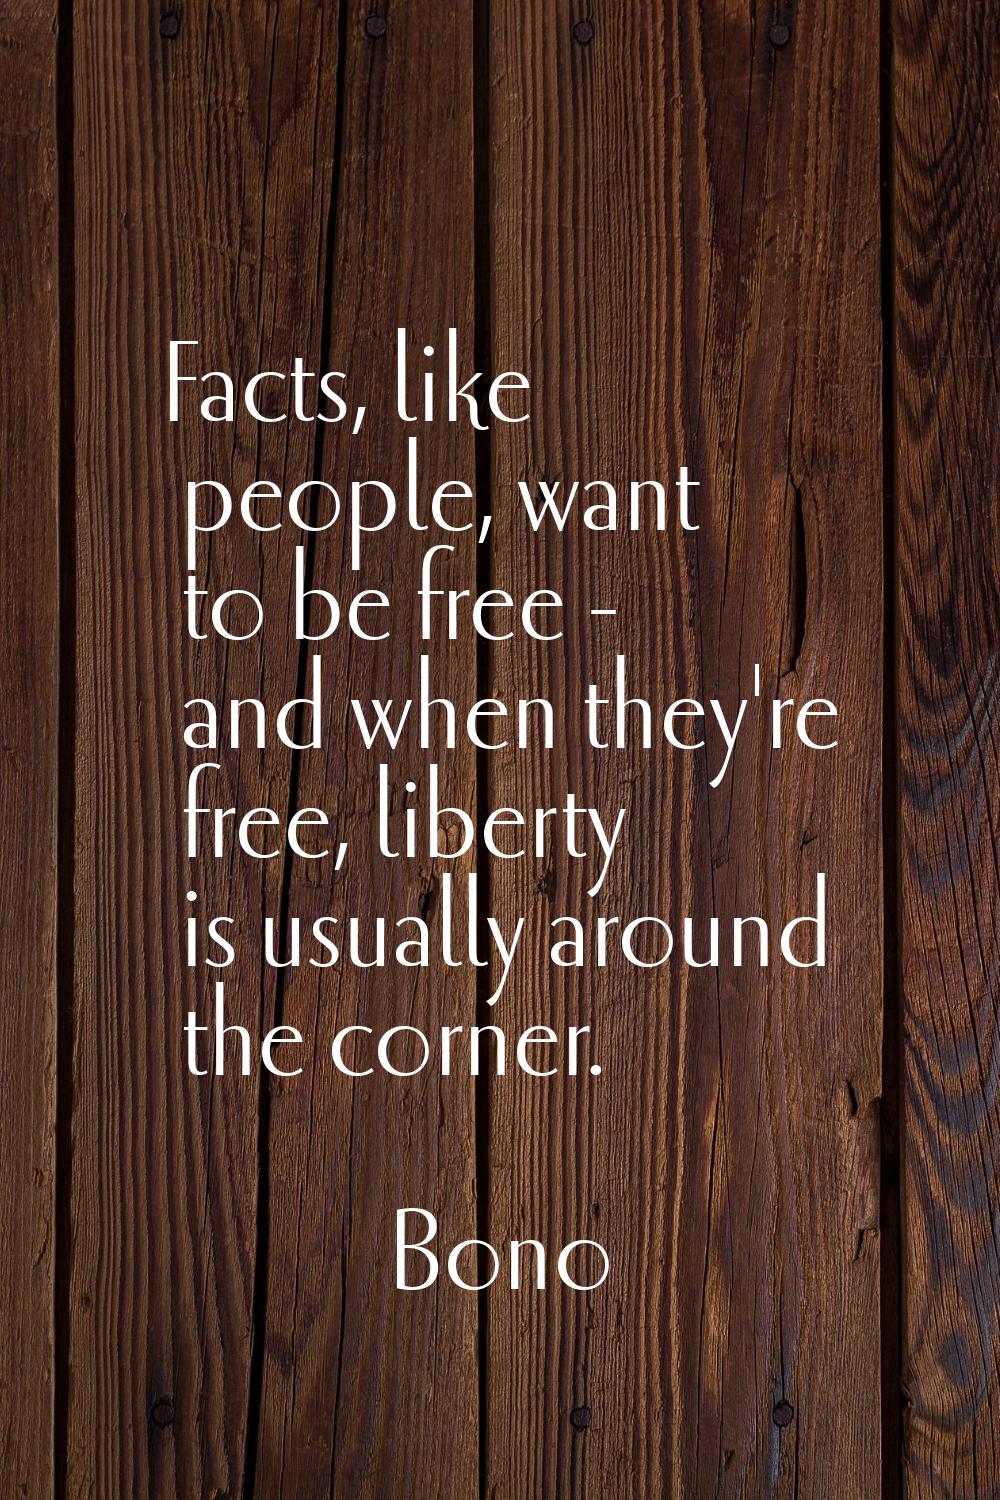 Facts, like people, want to be free - and when they're free, liberty is usually around the corner.